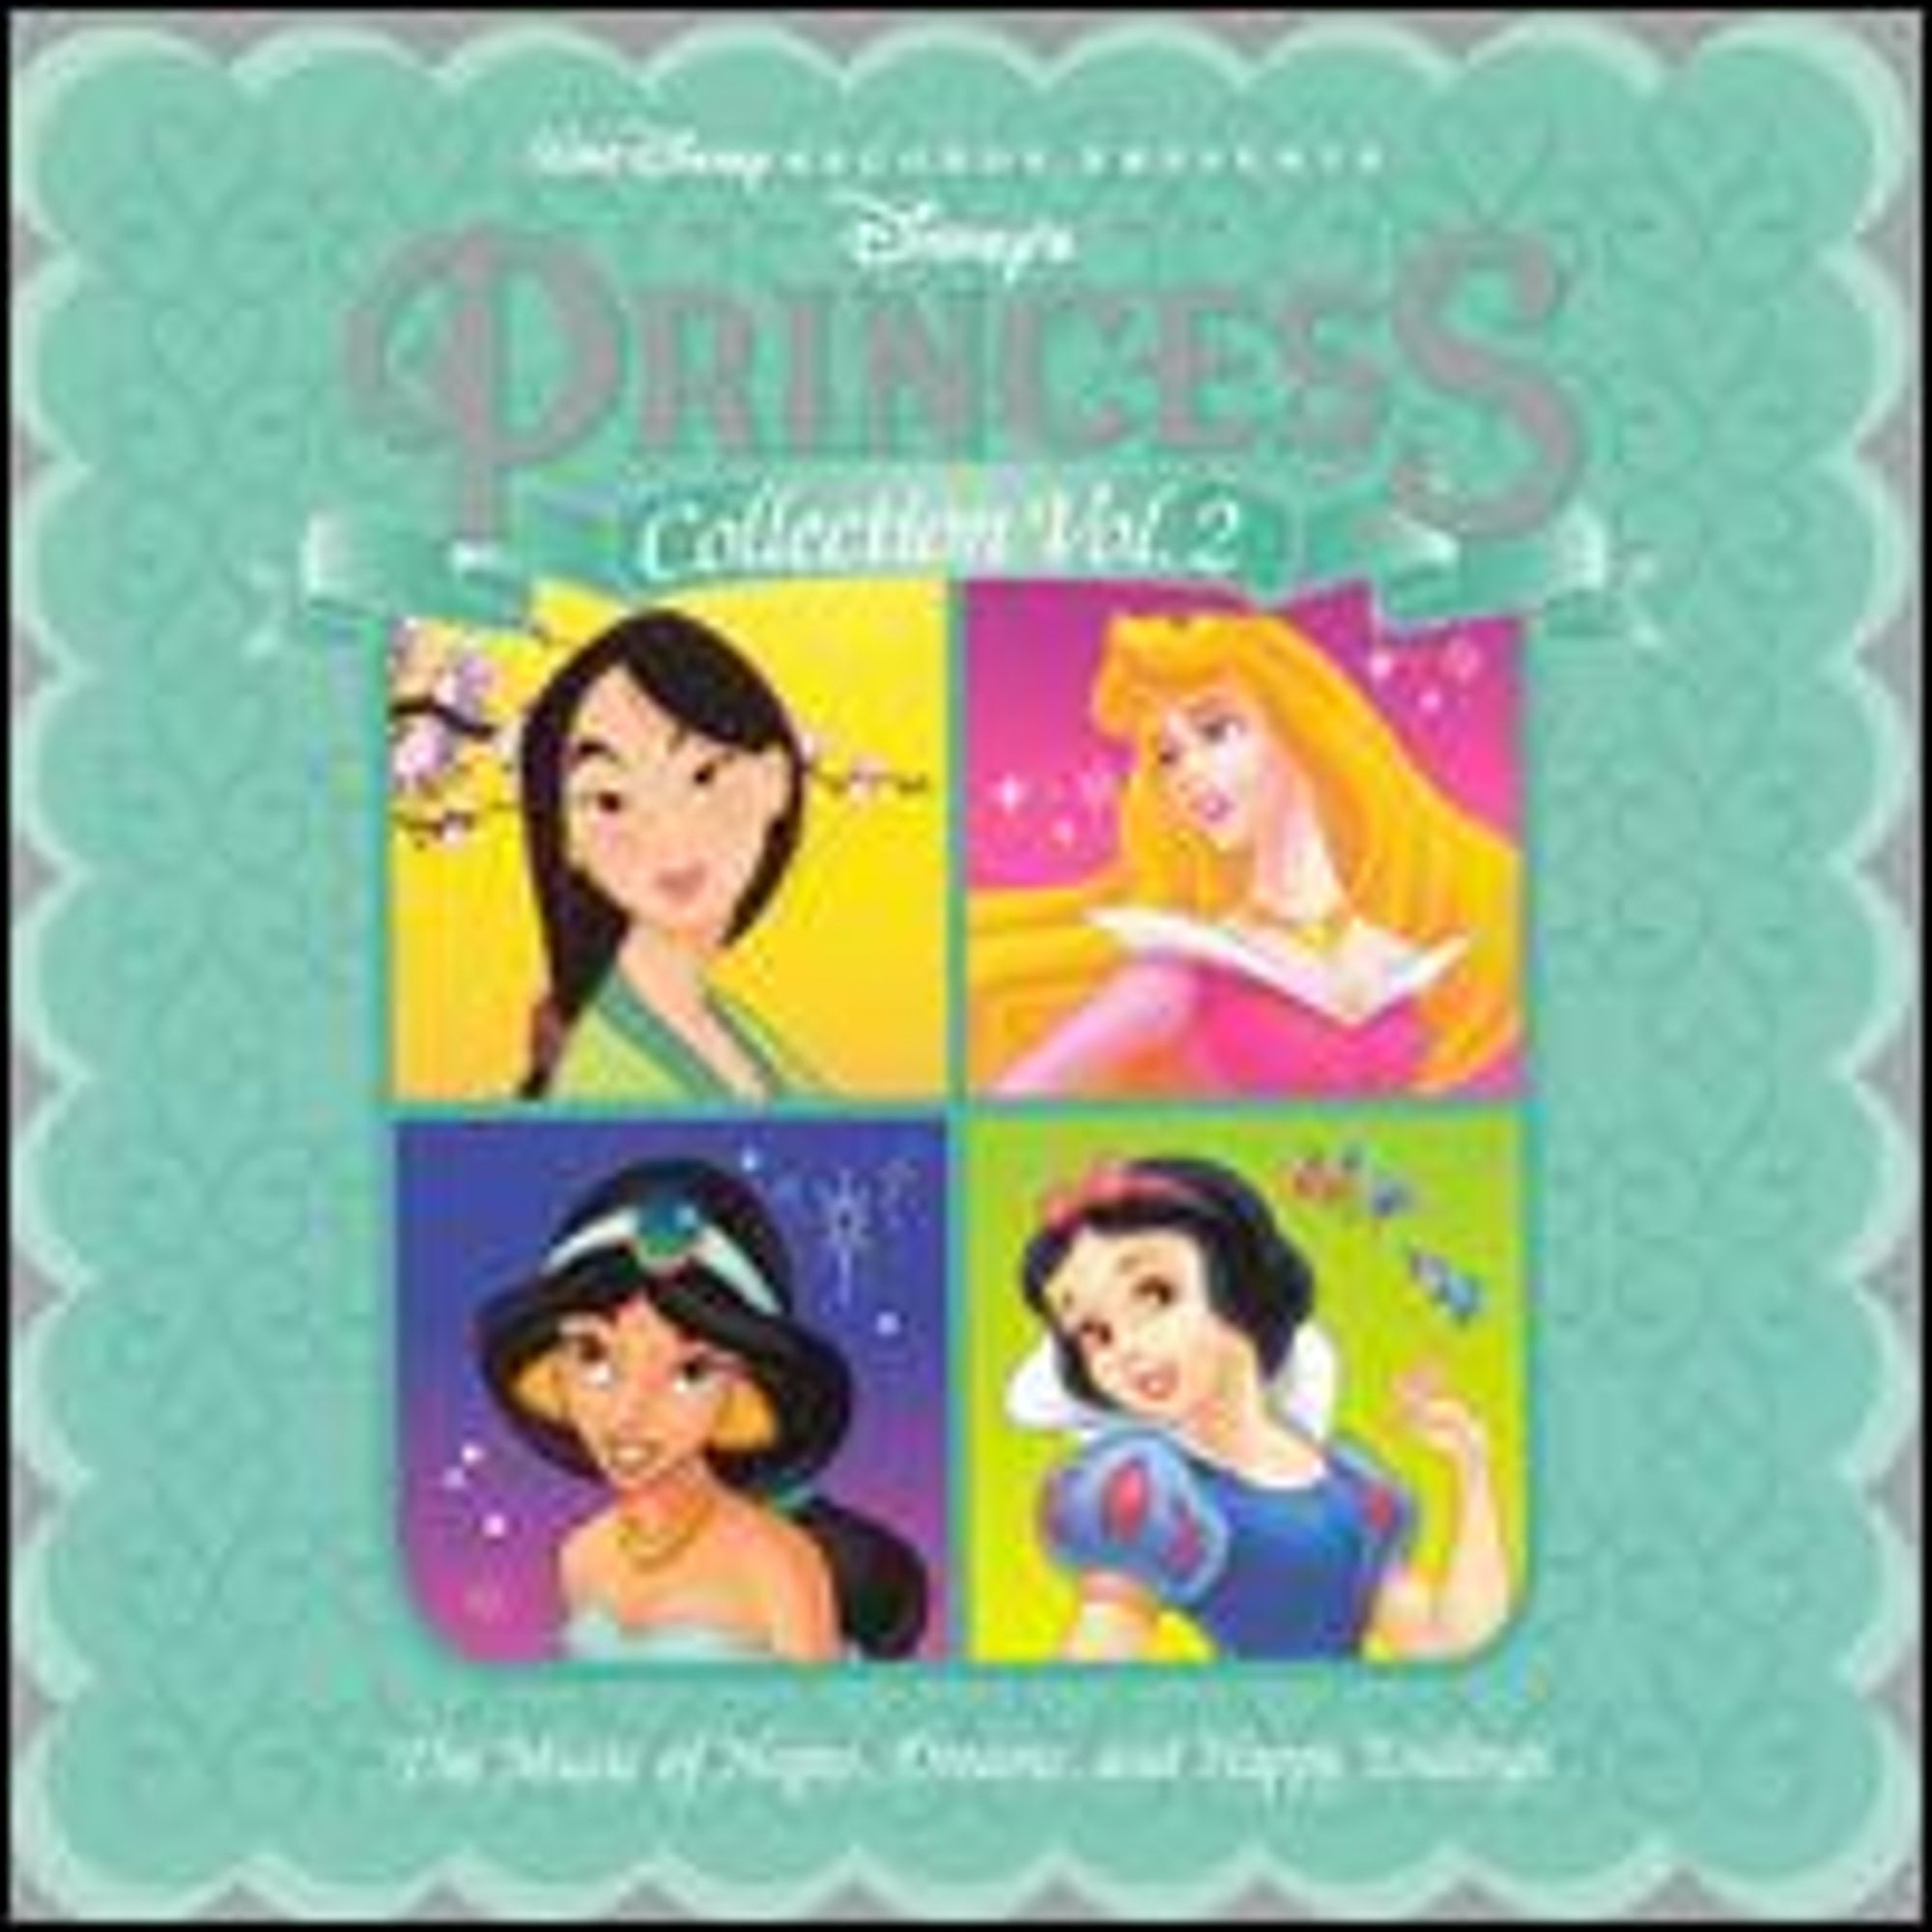 Pre Owned Disneys Princess Collection Vol 2 Cd 0050086063574 By Disney